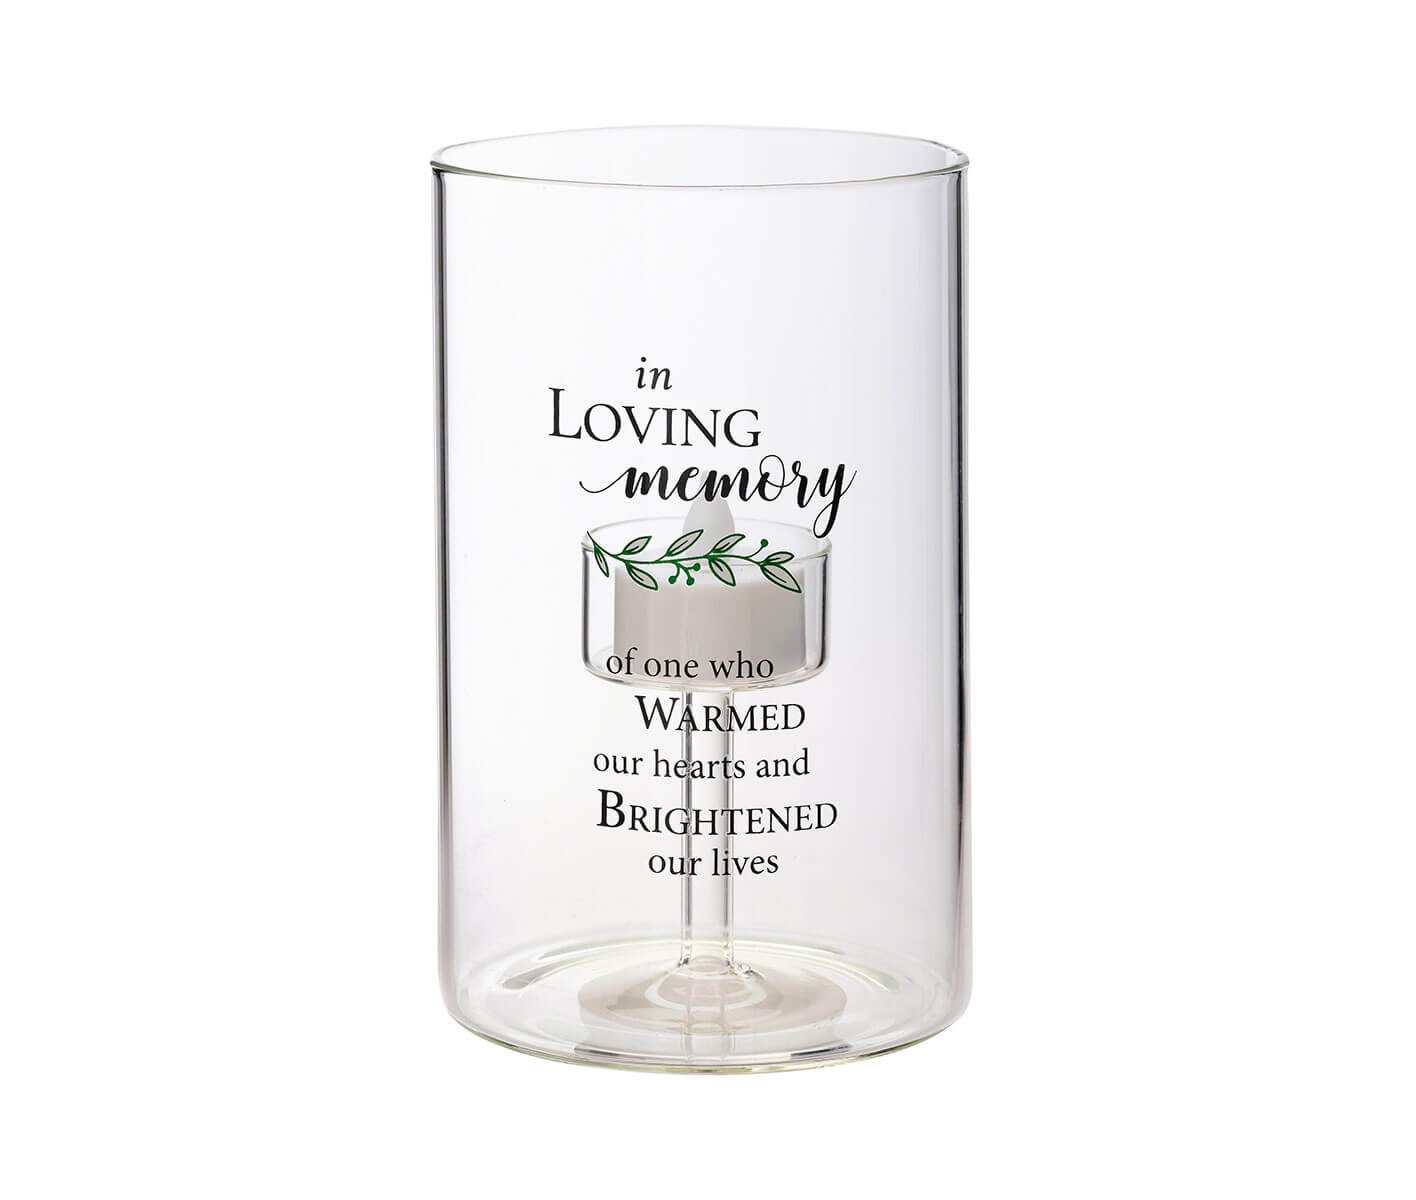 "In Loving Memory" Memorial Sympathy LED Glass Tea Light Holder with Verse